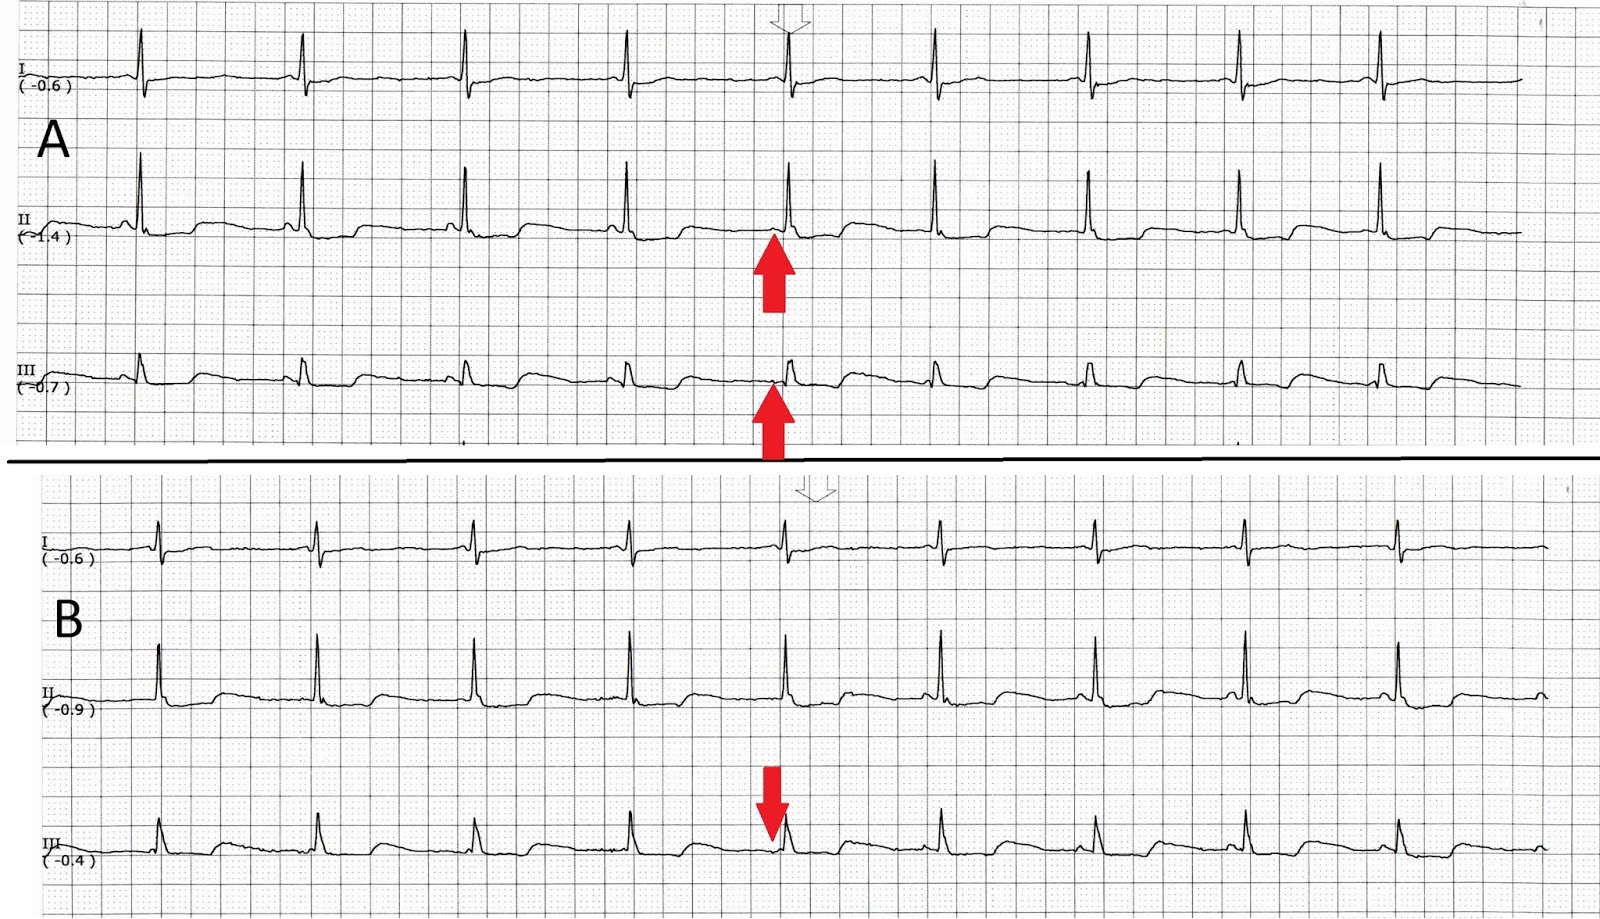 the wandering atrial pacemaker